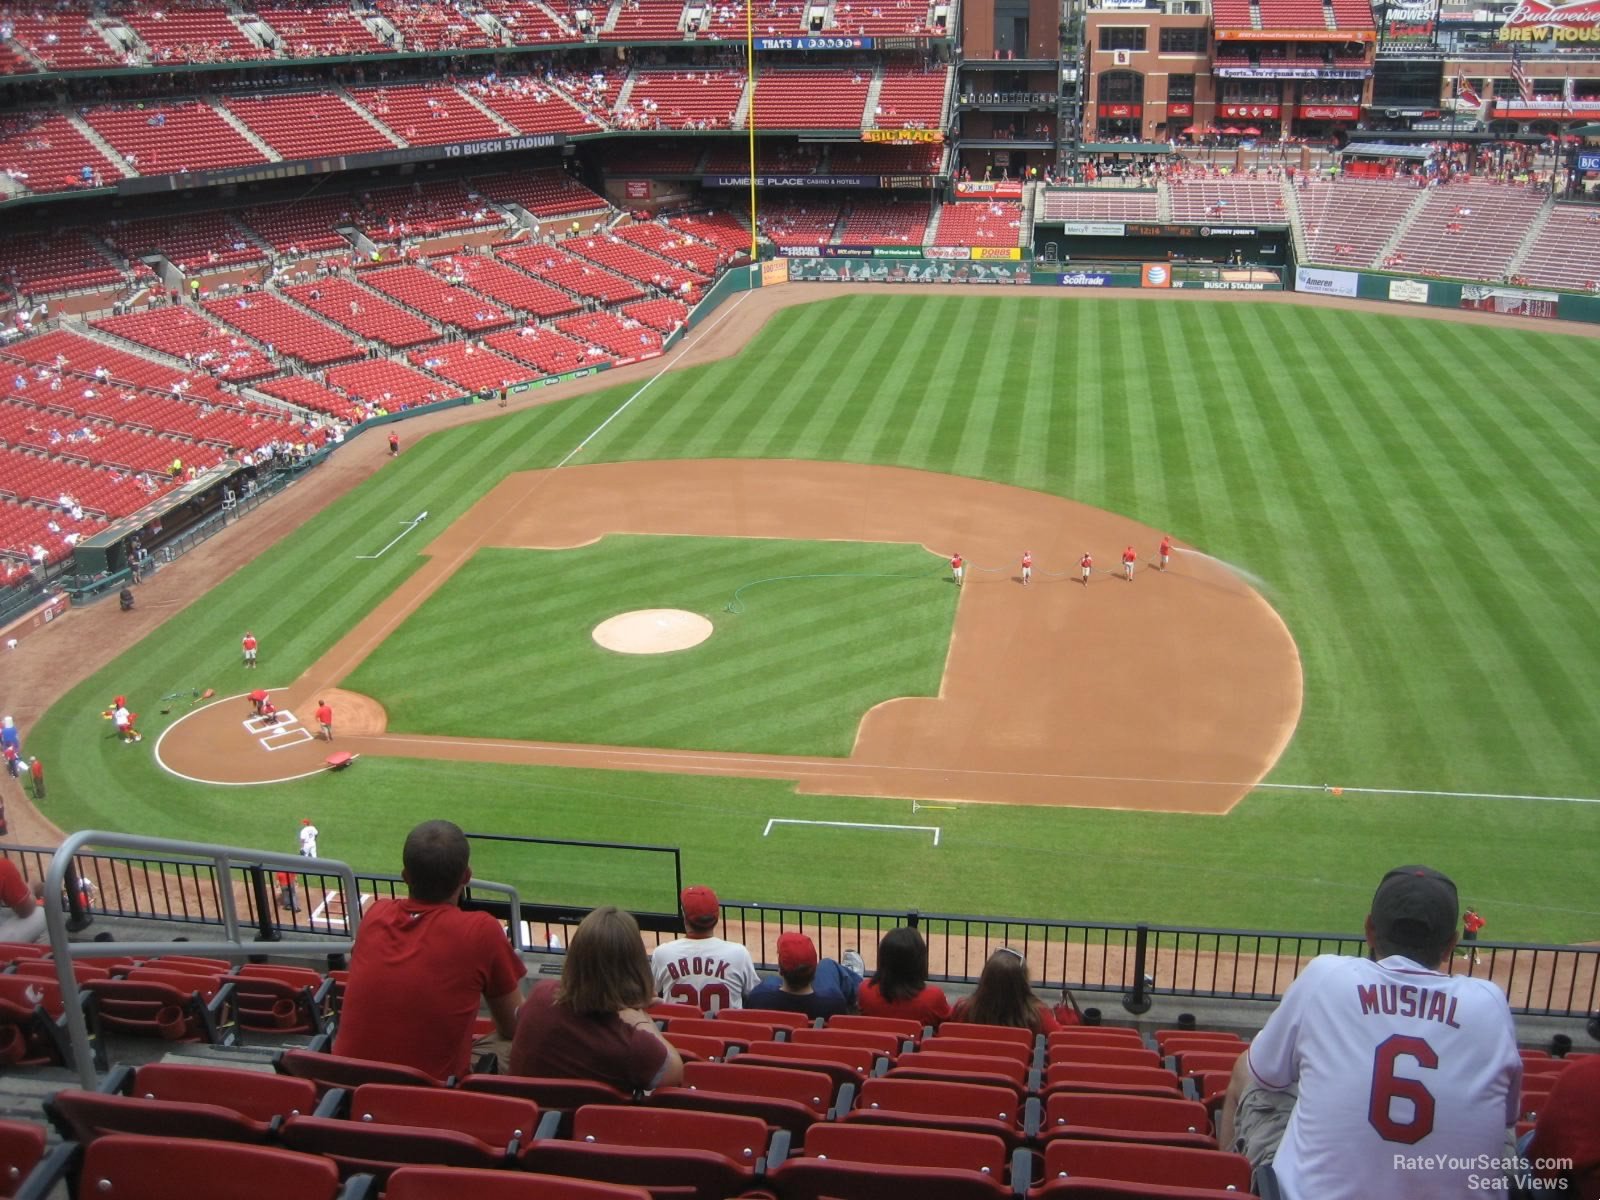 Section 342 at Busch Stadium - RateYourSeats.com